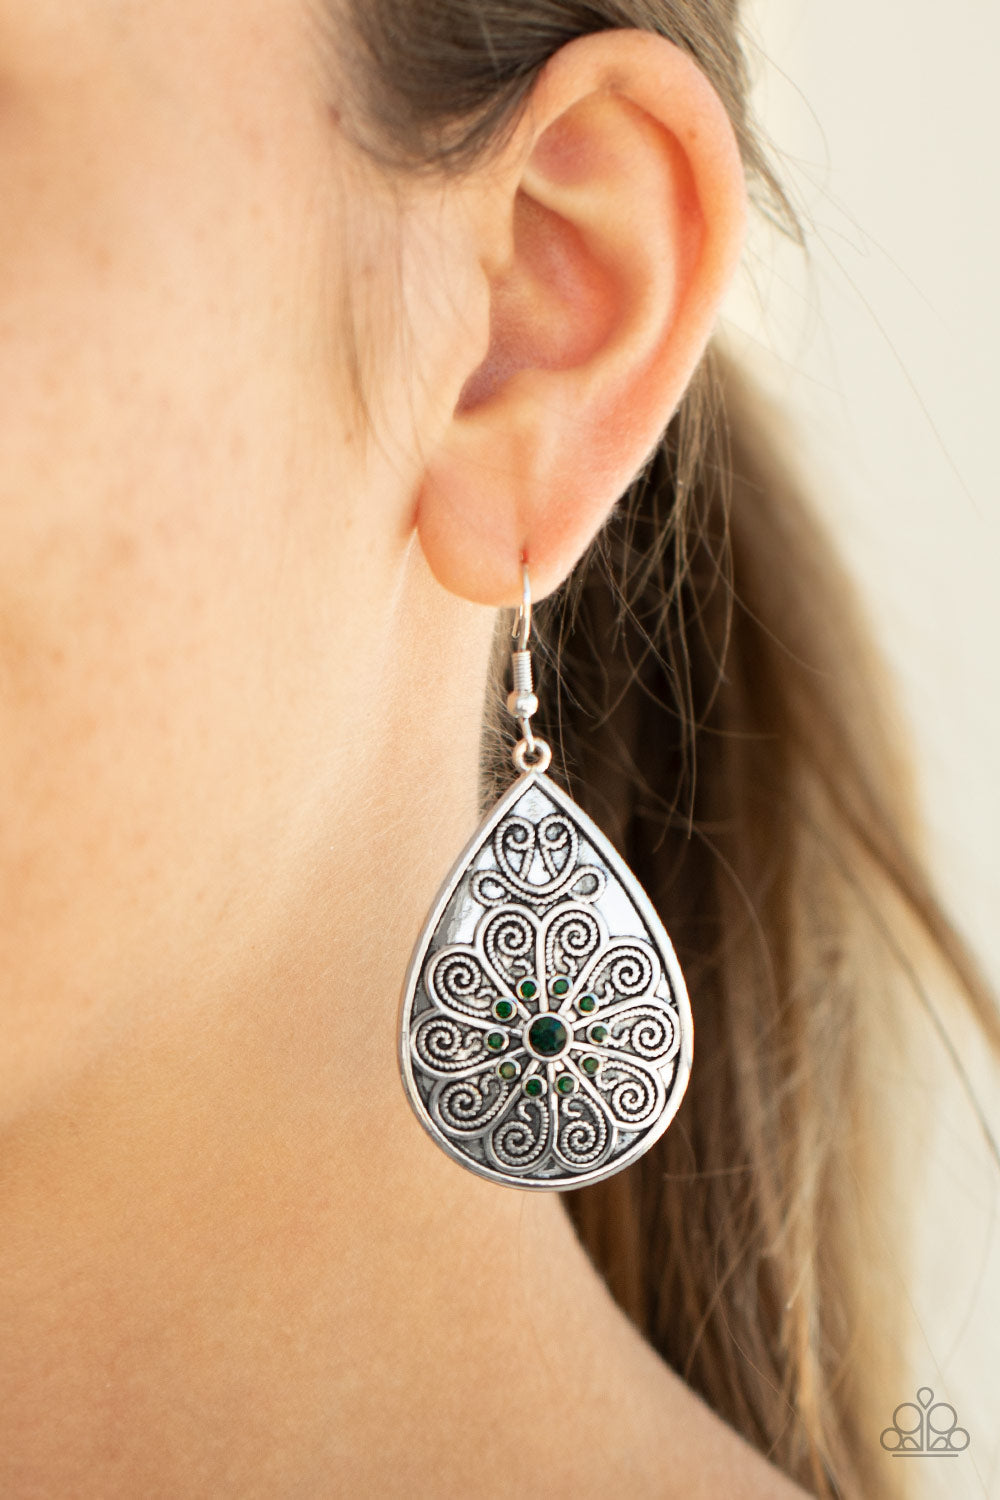 Banquet Bling - Green and Silver Earrings - Paparazzi Accessories - Embossed in a frilly floral pattern, a green rhinestone dotted silver teardrop swings from the ear for a whimsical fashion. Earring attaches to a standard fishhook fitting. Sold as one pair of earrings.